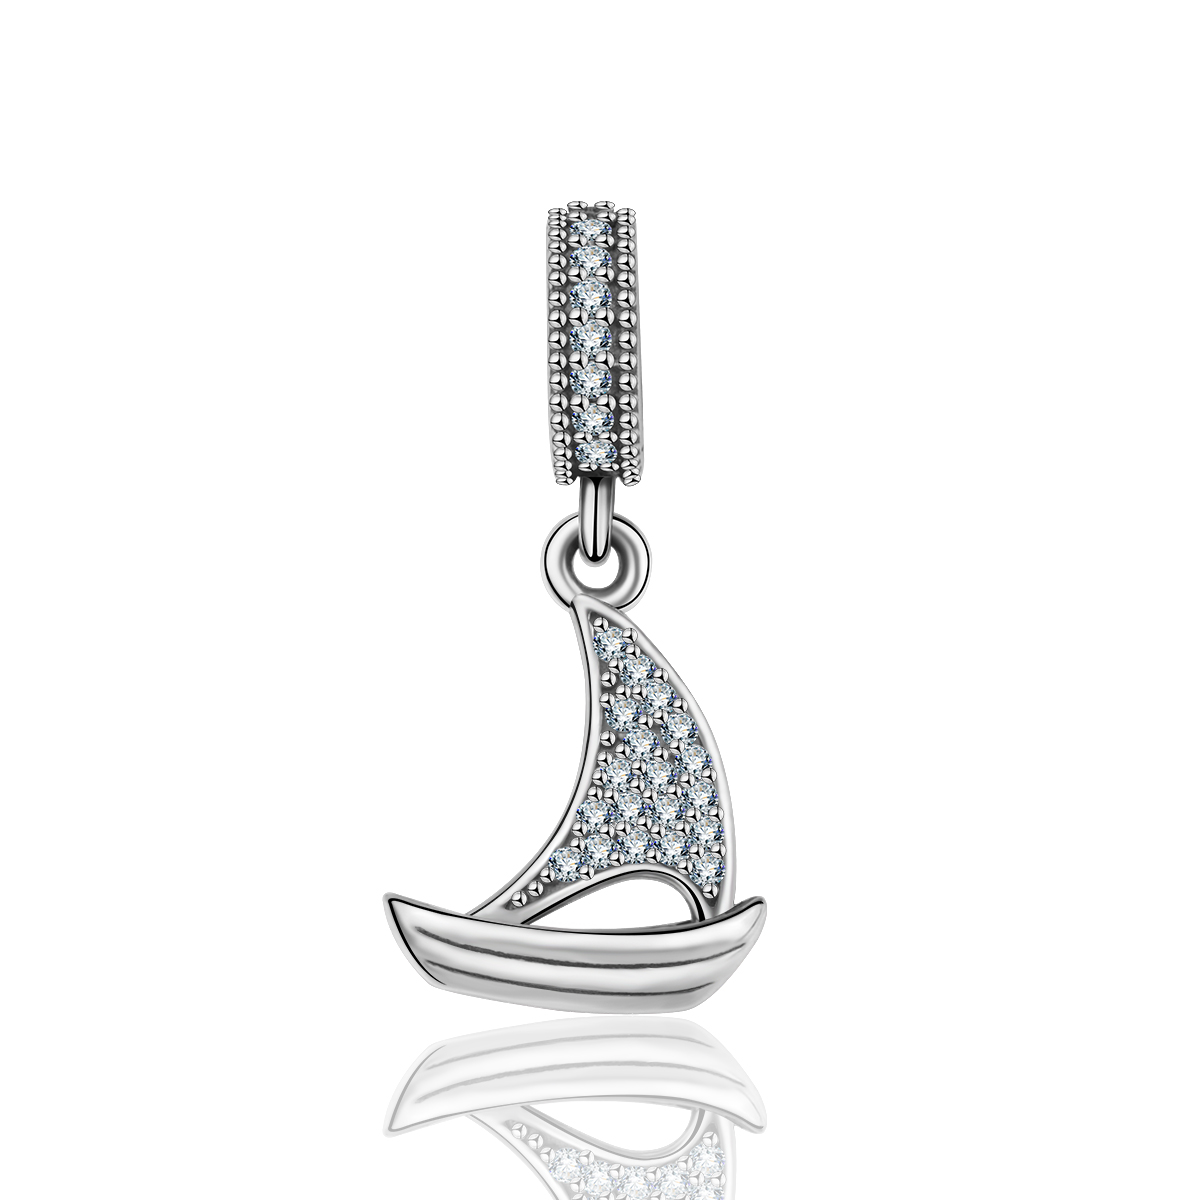 Jewelry Accessories Sailboat Shaped Pendant Sterling Silver Metal Beads